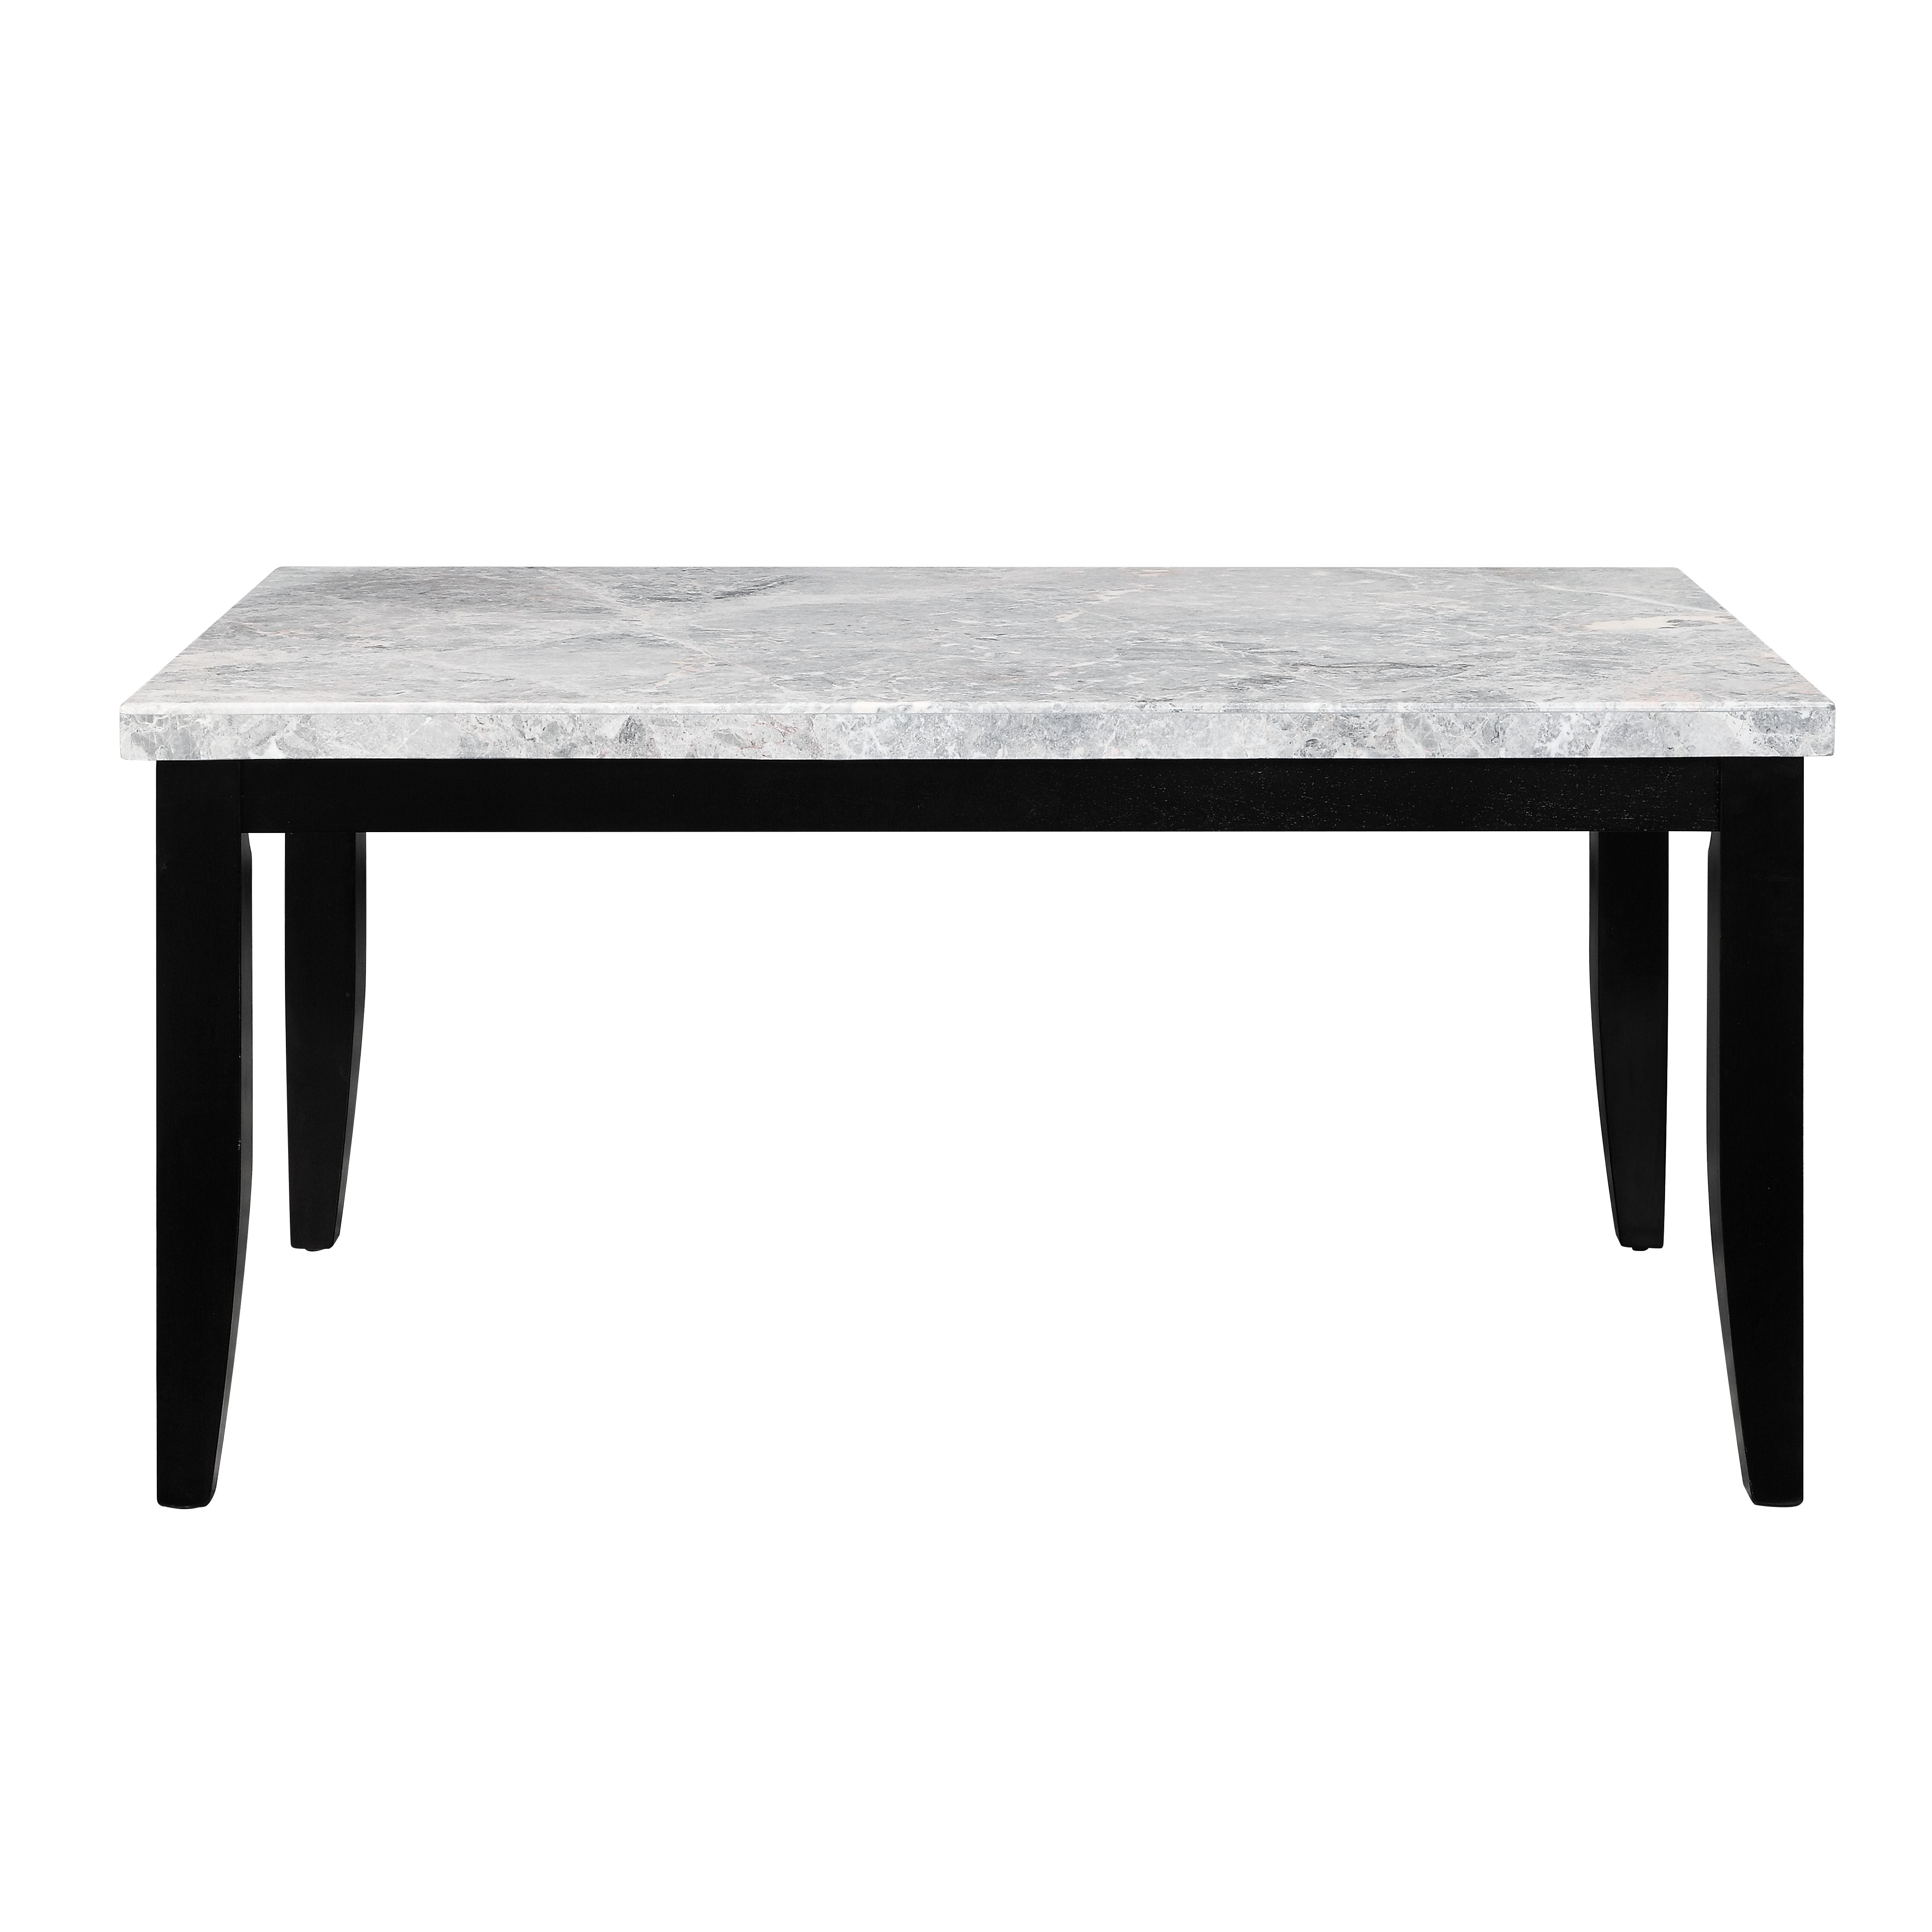 ZNTS ACME Hussein DINING TABLE W/MARBLE TOP Marble Top & Black Finish DN01446